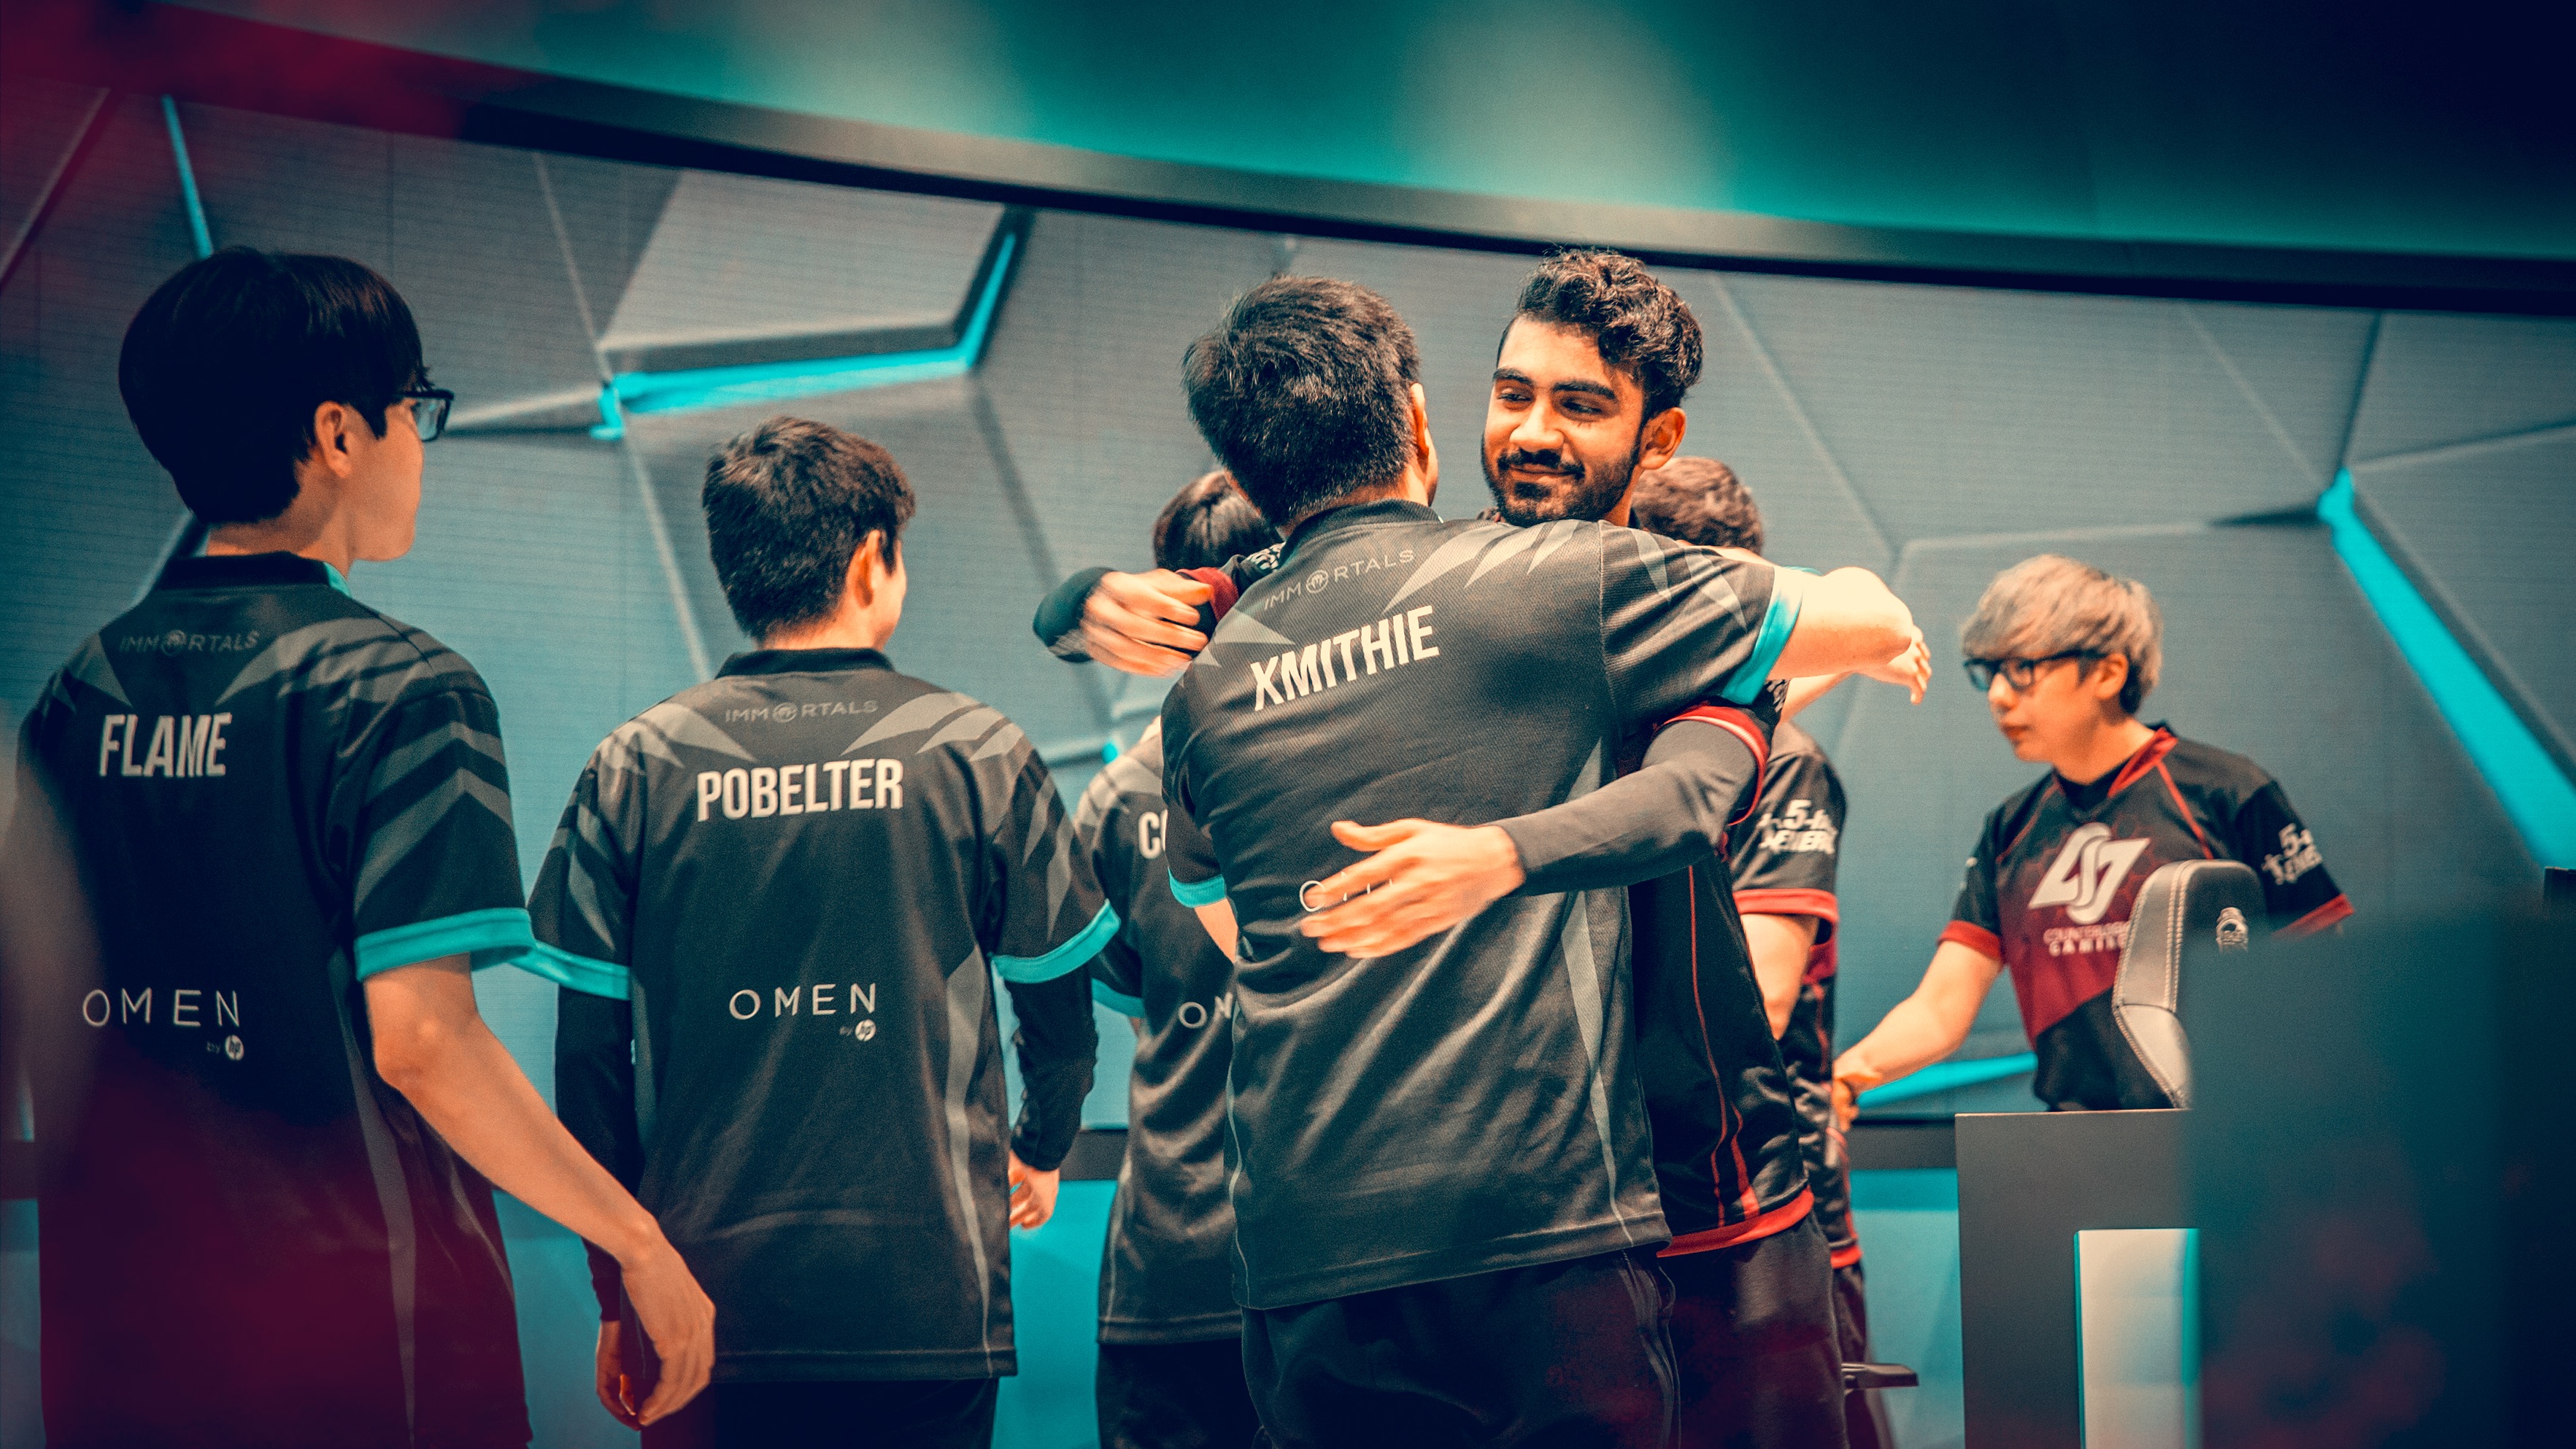 CLG DARSHAN AND IMT XMITHIE